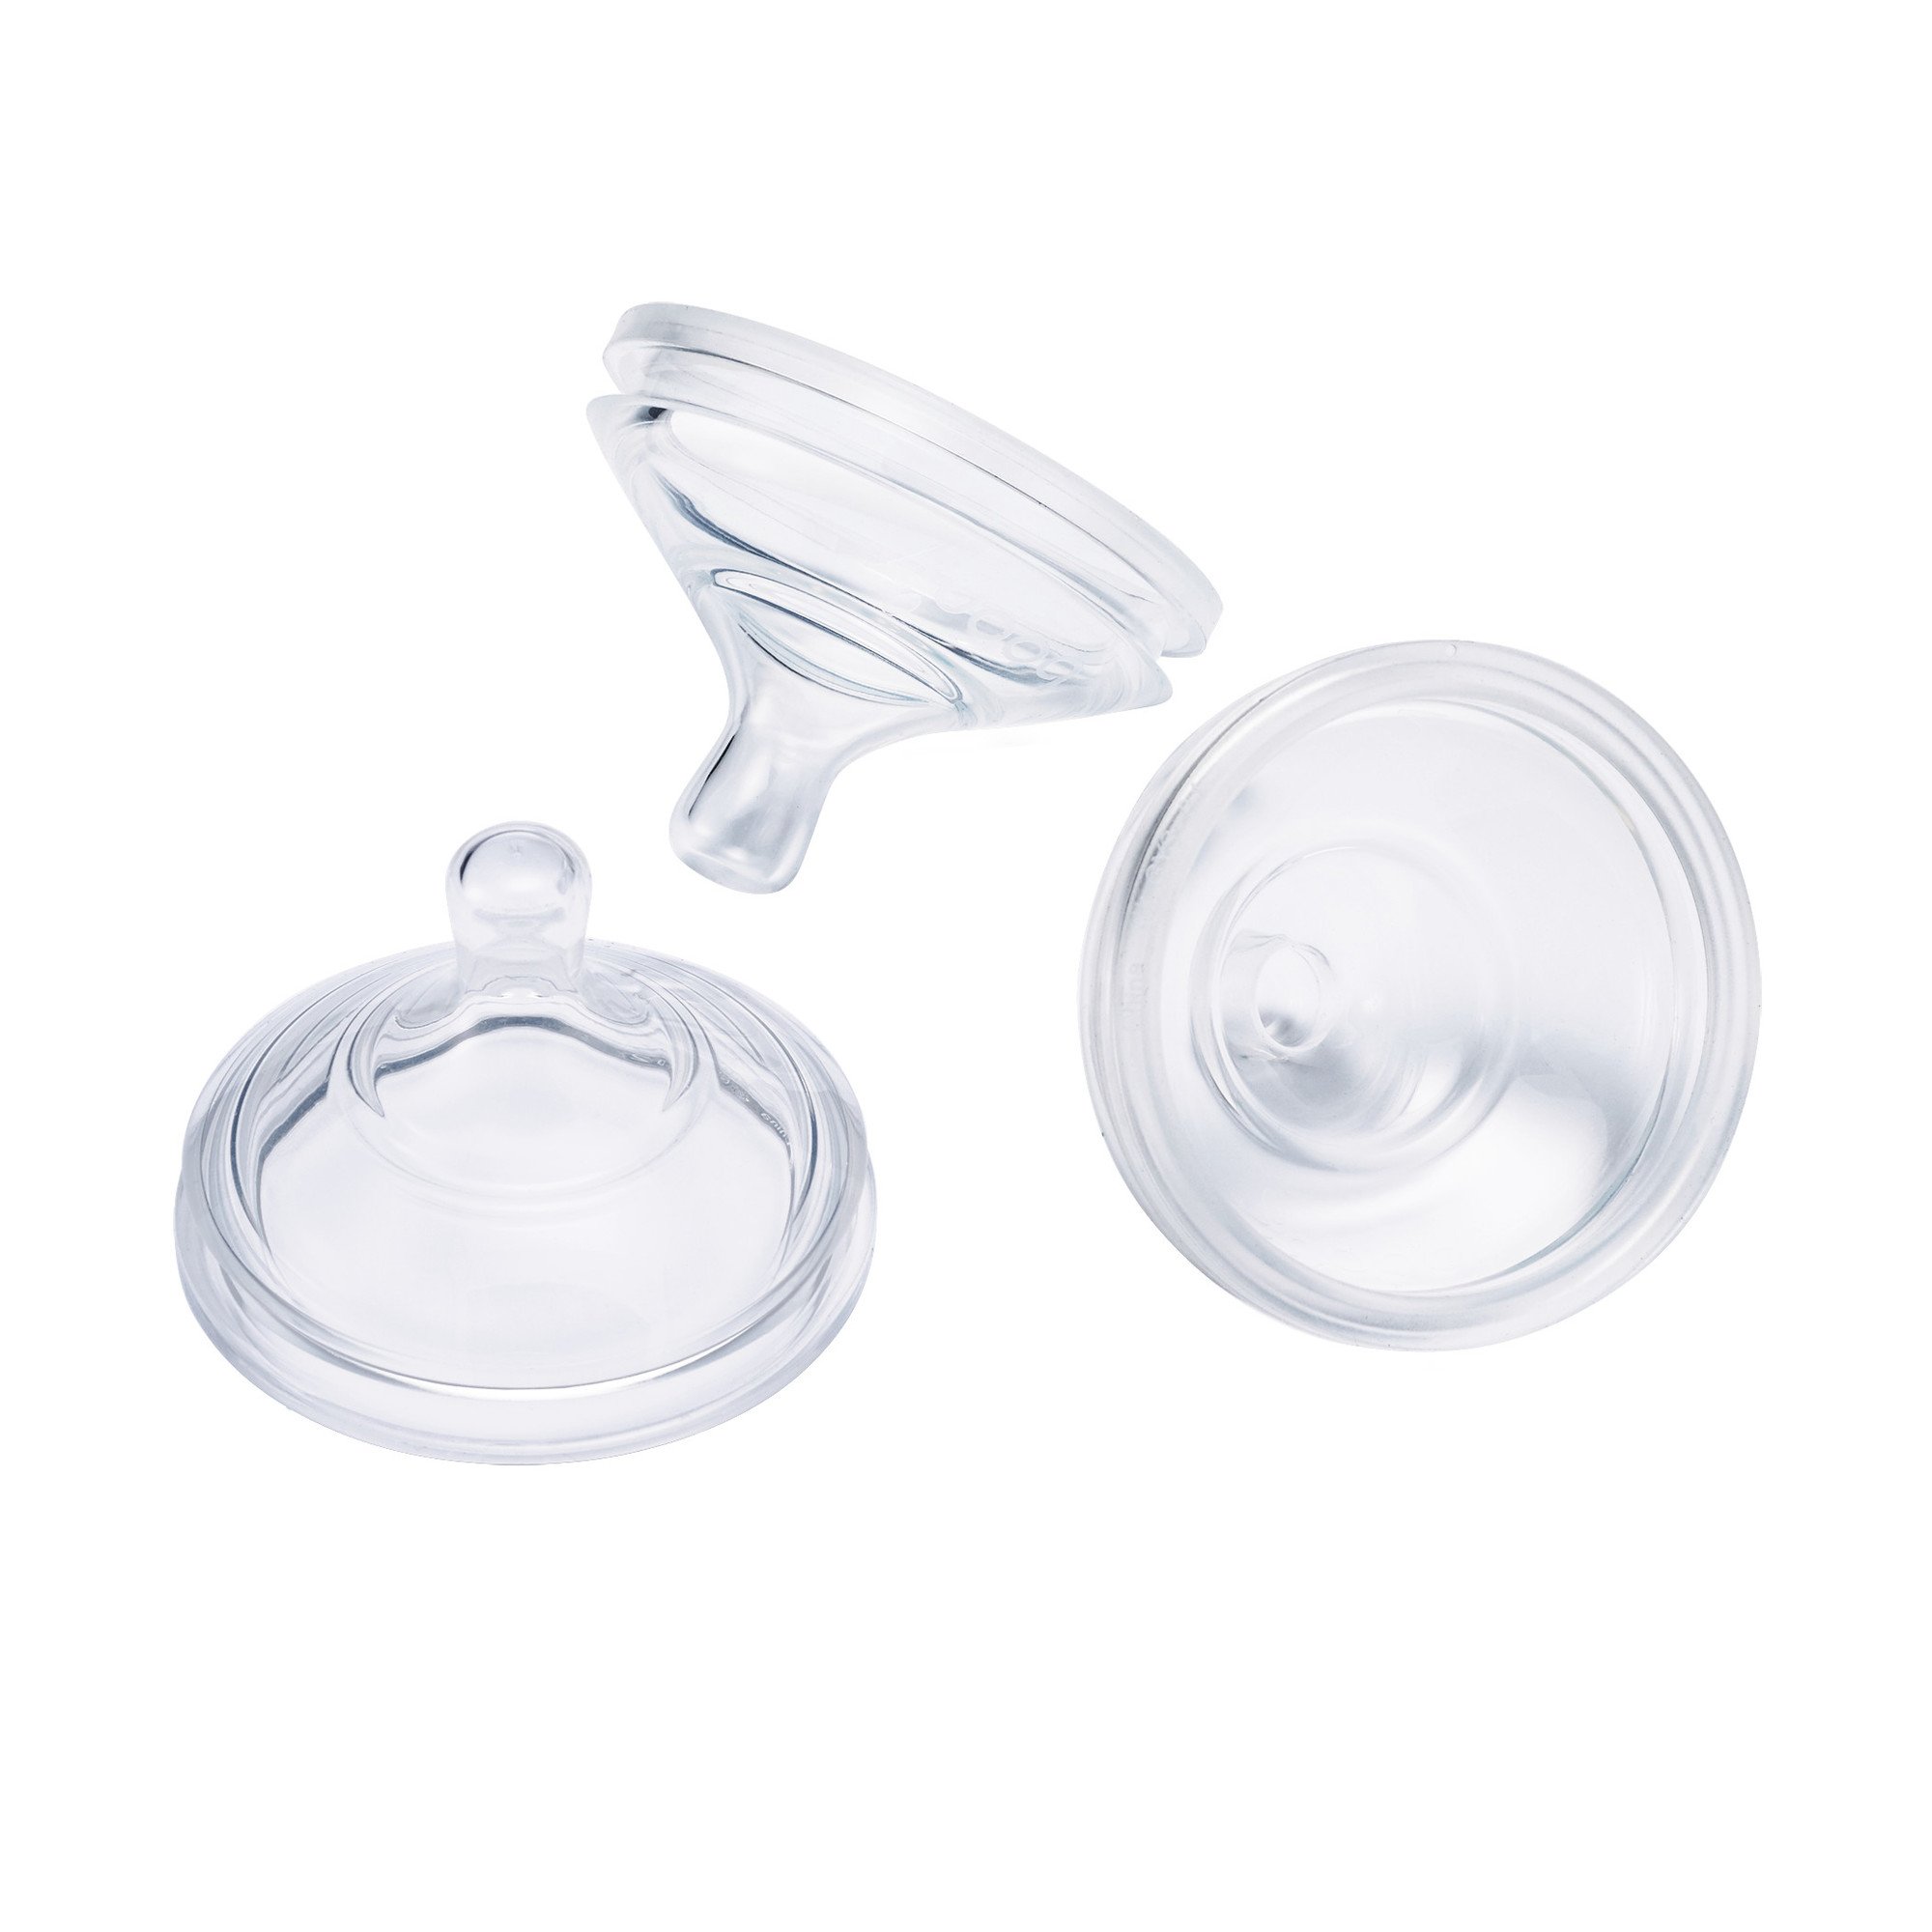 Boon NURSH Silicone Replacement Nipple, Air-Free Feeding, Stage 1 Slow Flow, Birth and Up (Pack of 3)